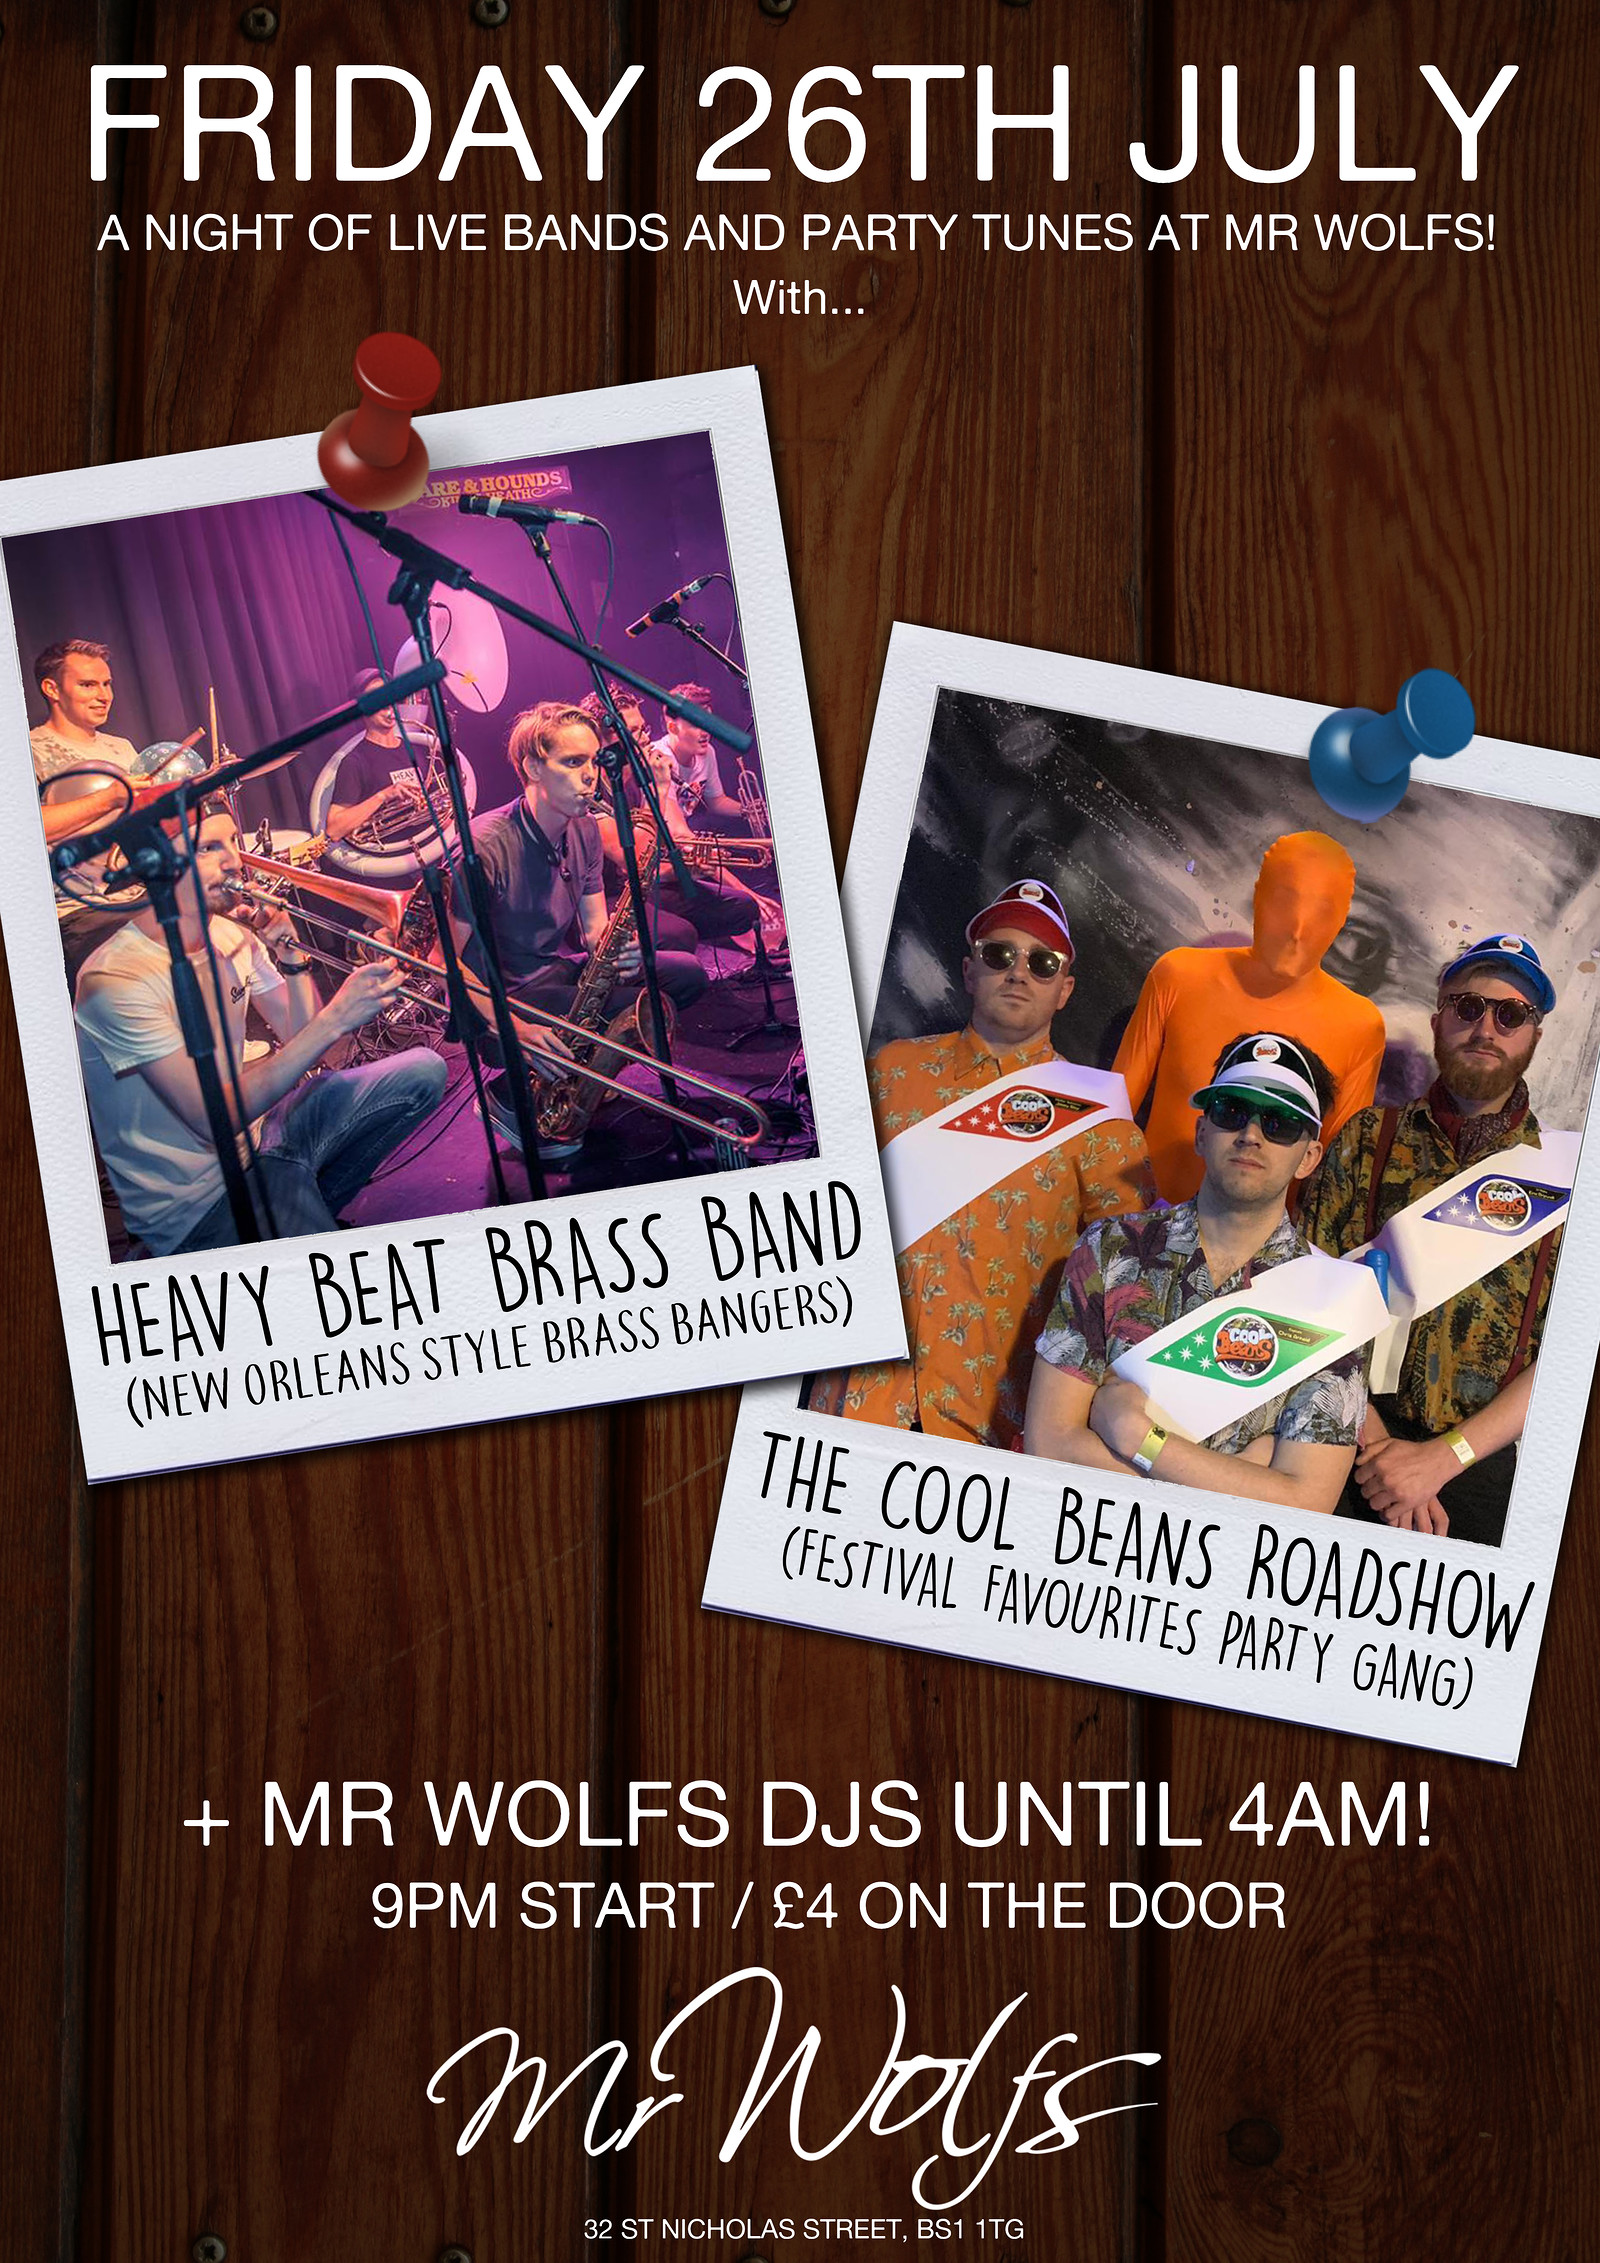 Heavy Beat Brass Band & The Cool Beans Roadshow at Mr Wolfs